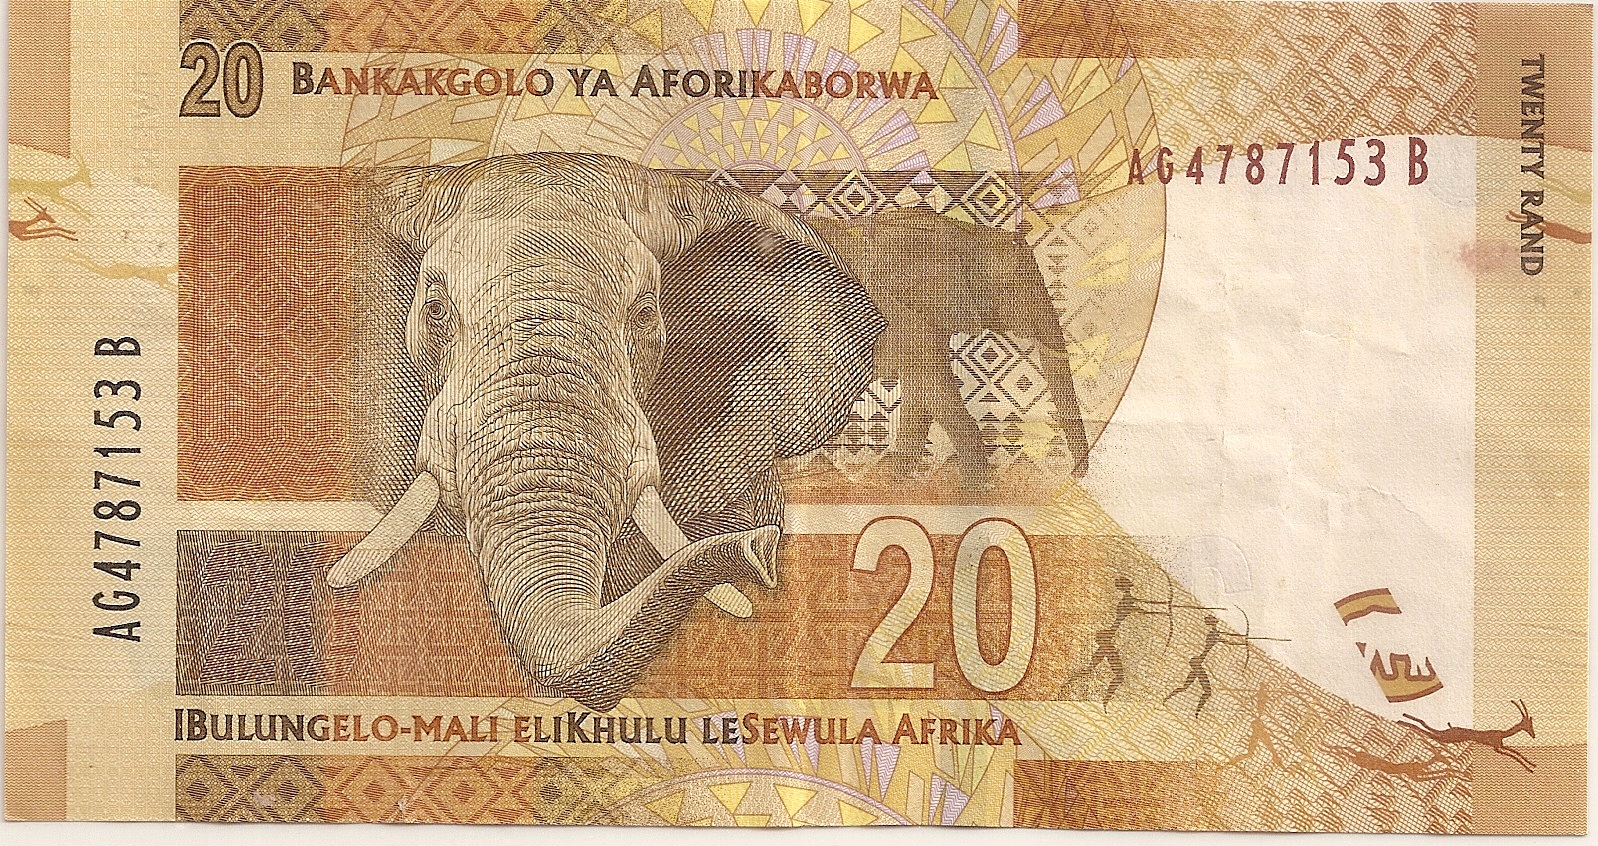 SOUTH AFRICA 20 RAND P129 a 2005 ELEPHANT ANIMAL MINING UNC MONEY BILL BANK NOTE 